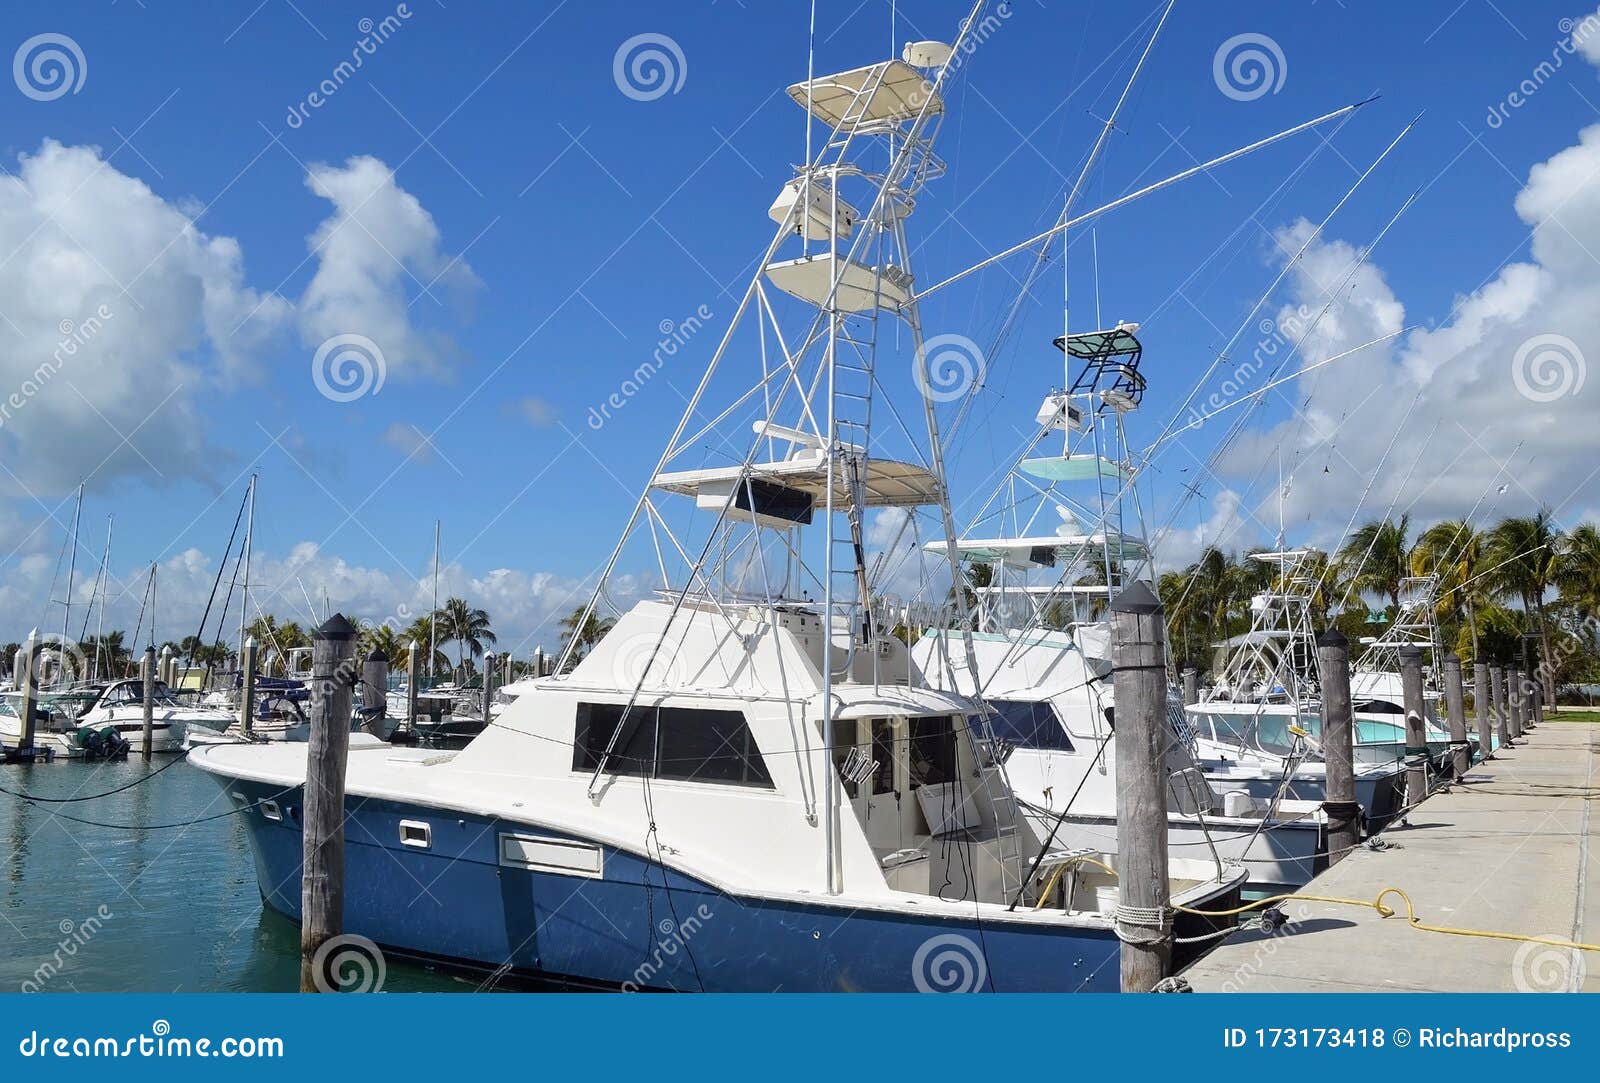 Charter Sport Fishing Boats with Tuna Towers Stock Photo - Image